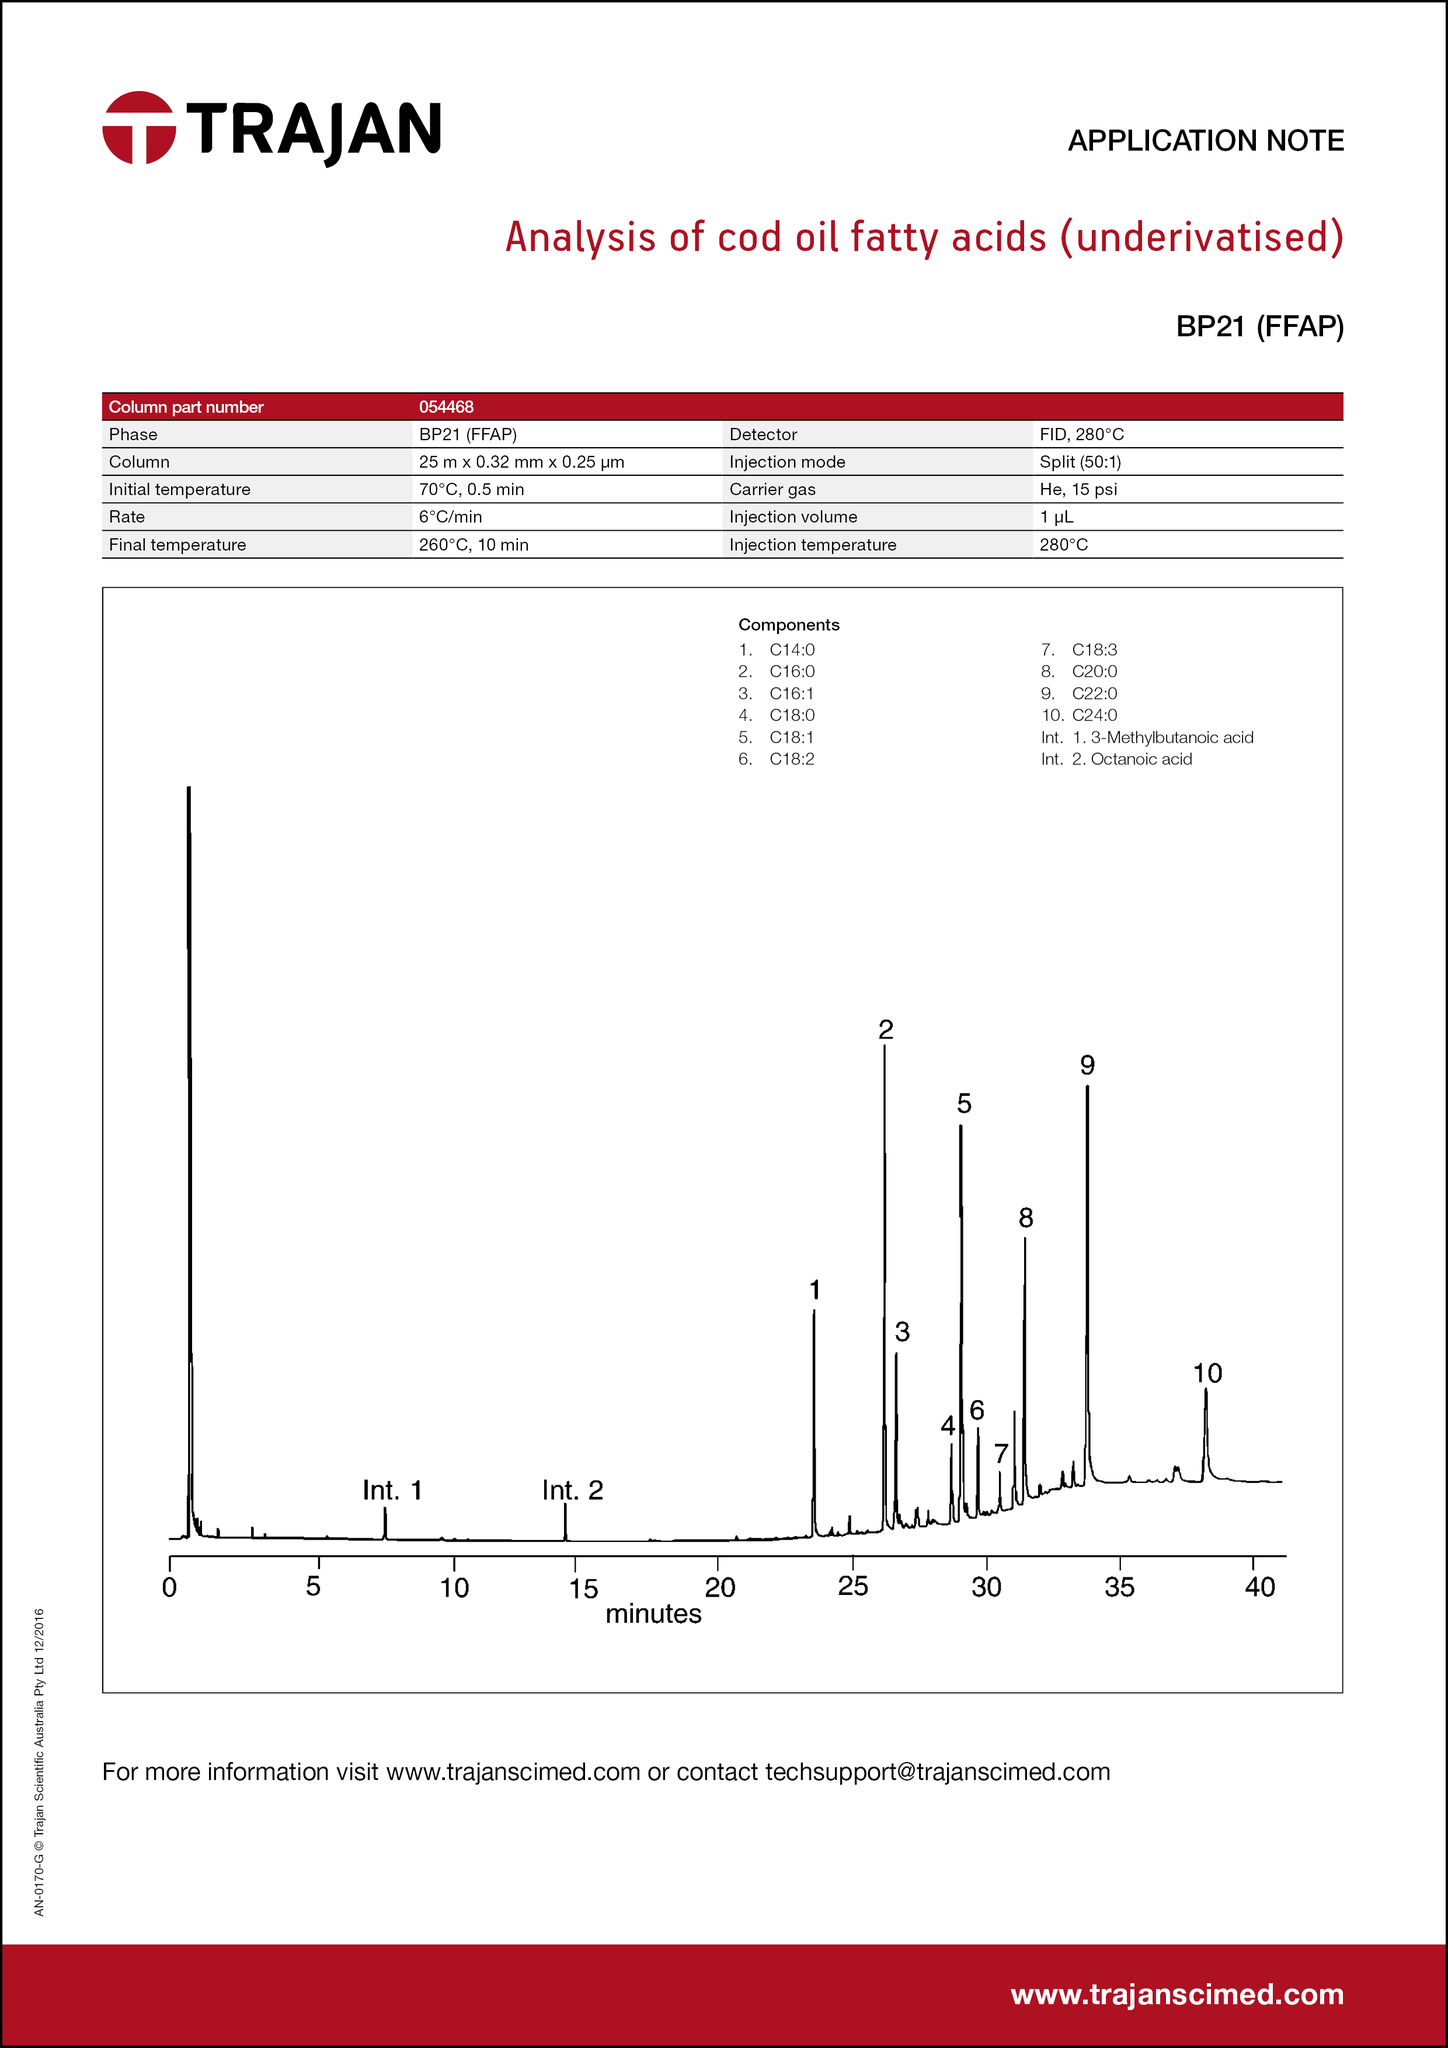 Application Note - Analysis of cod oil fatty acids (underivatized)